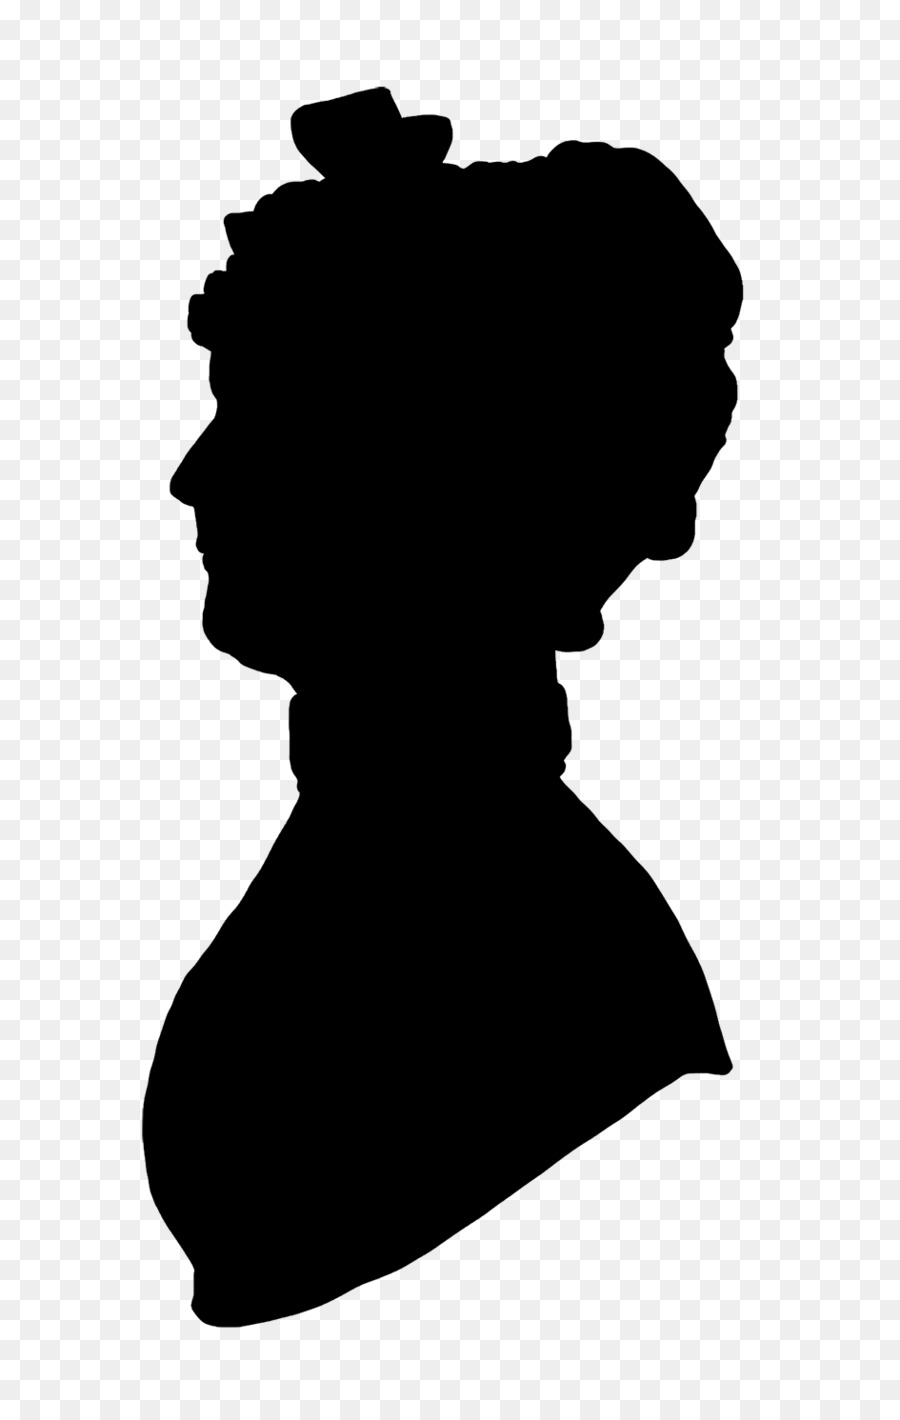 Victorian era Woman with a Hat Silhouette Female - silhouettes png download - 945*1471 - Free Transparent Victorian Era png Download.